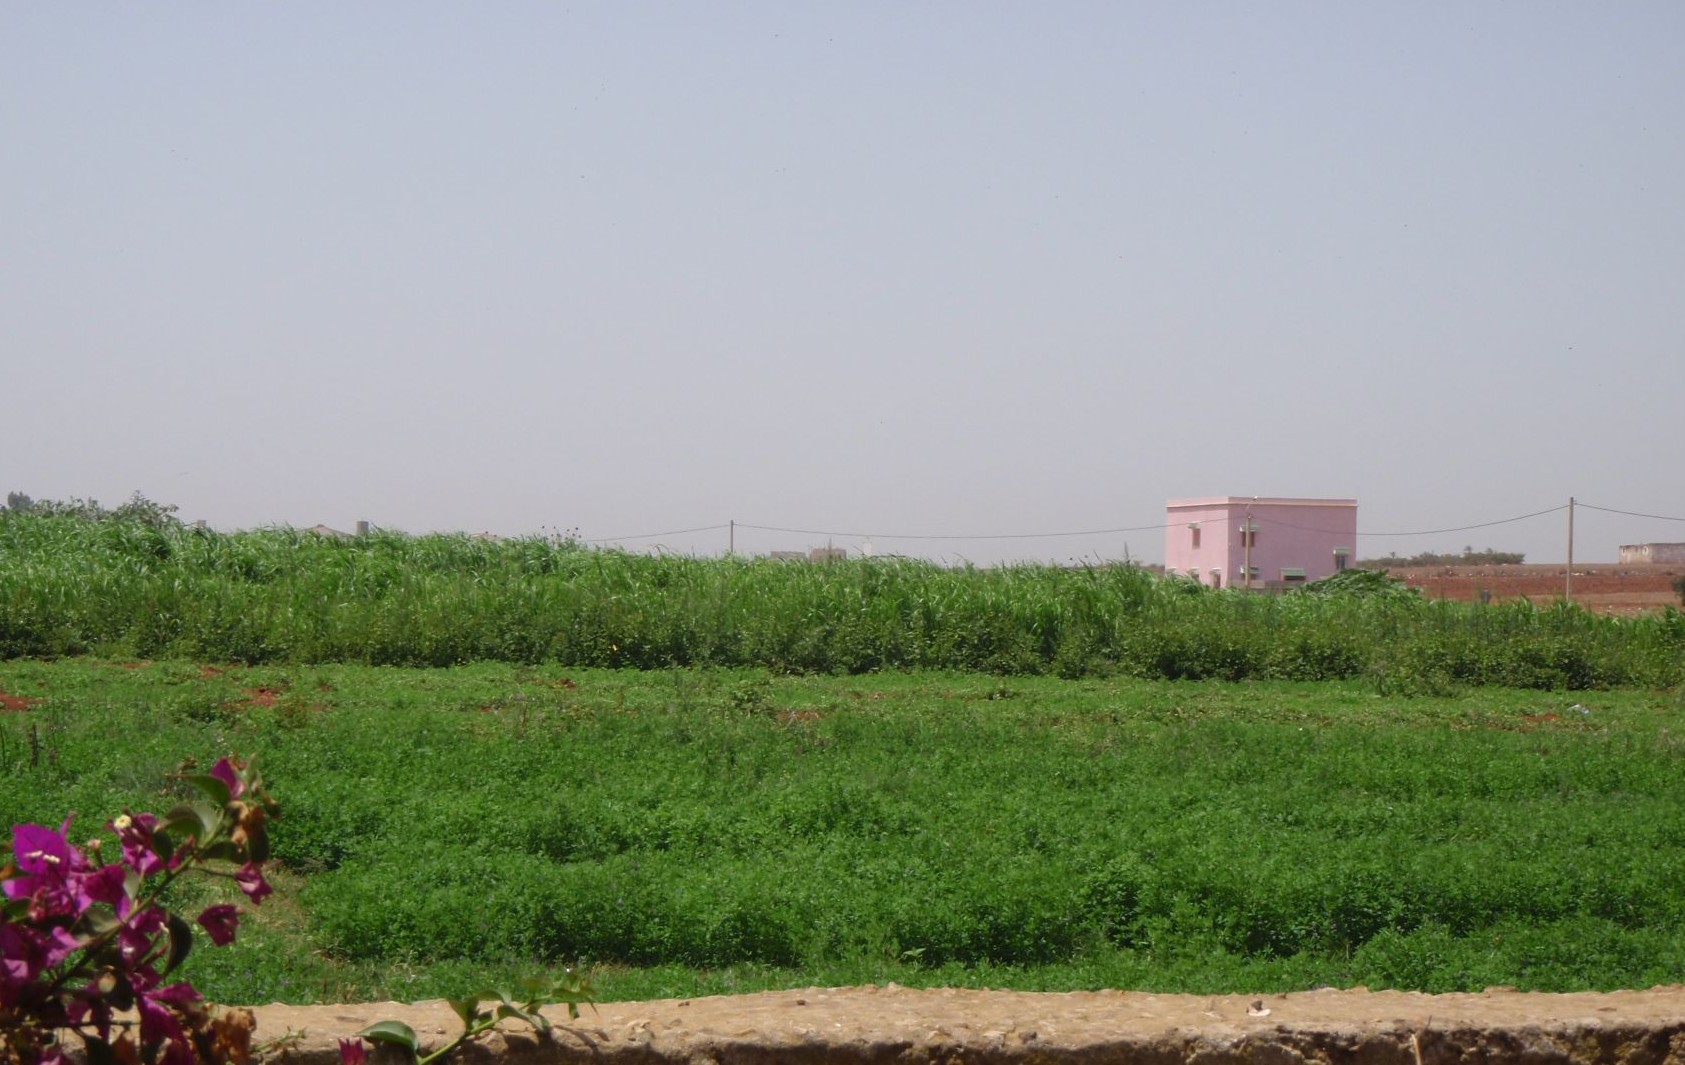 Farming in Ouled Ahmed